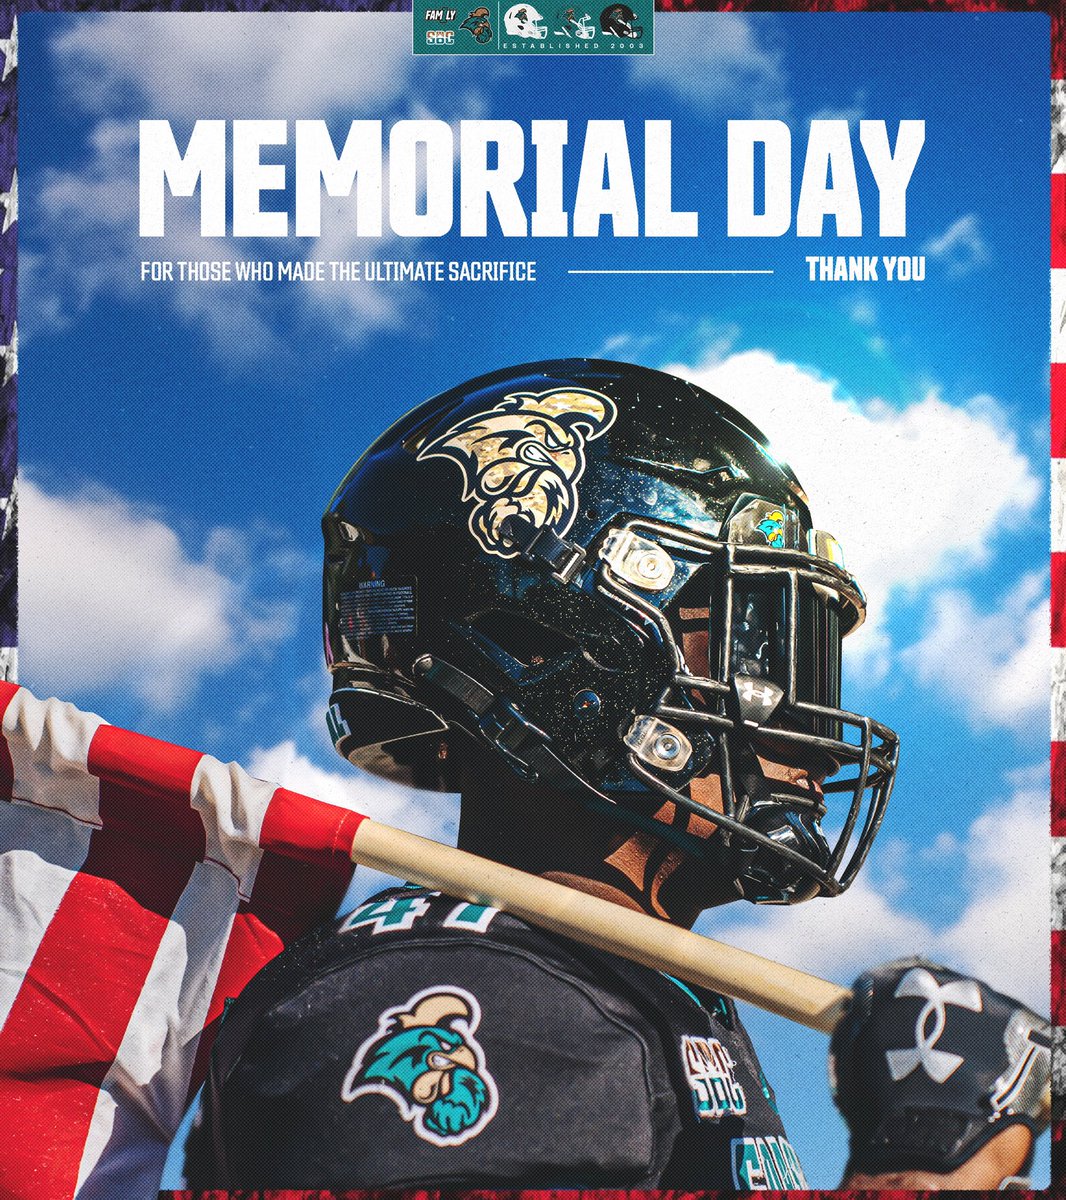 For those who made the ultimate sacrifice … Thank You 🇺🇸 #NeverForgotten #FAM1LY